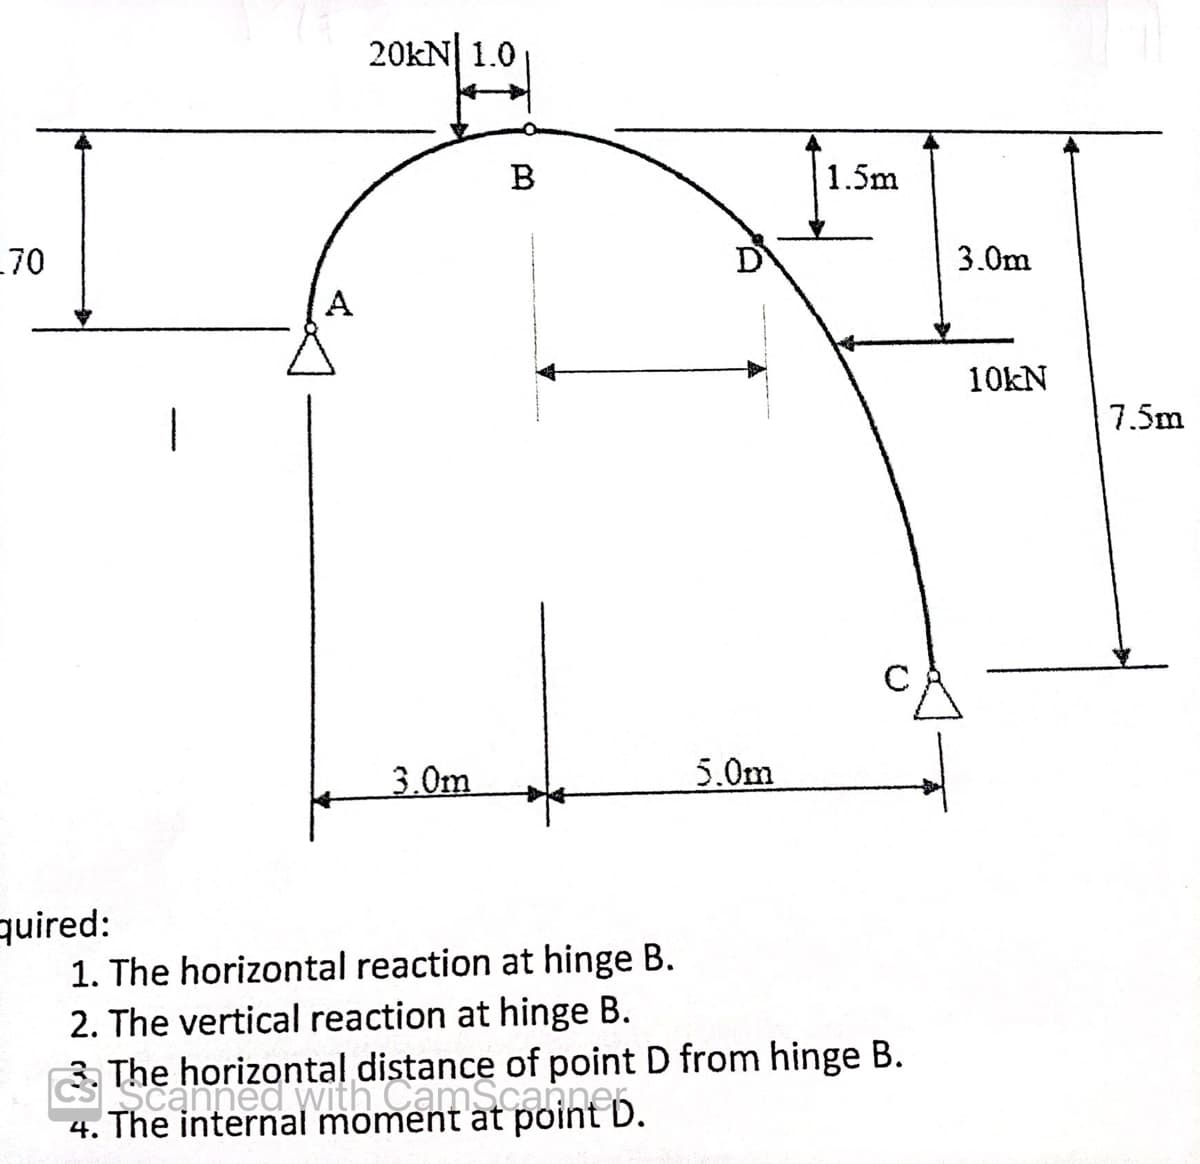 .70
quired:
1
A
20KN 1.0
3.0m
B
1. The horizontal reaction at hinge B.
2. The vertical reaction at hinge B.
5.0m
1.5m
The horizontalnitamatant b
horizontal distance of point D from hinge B.
4. The internal moment at point D.
3.0m
10kN
7.5m